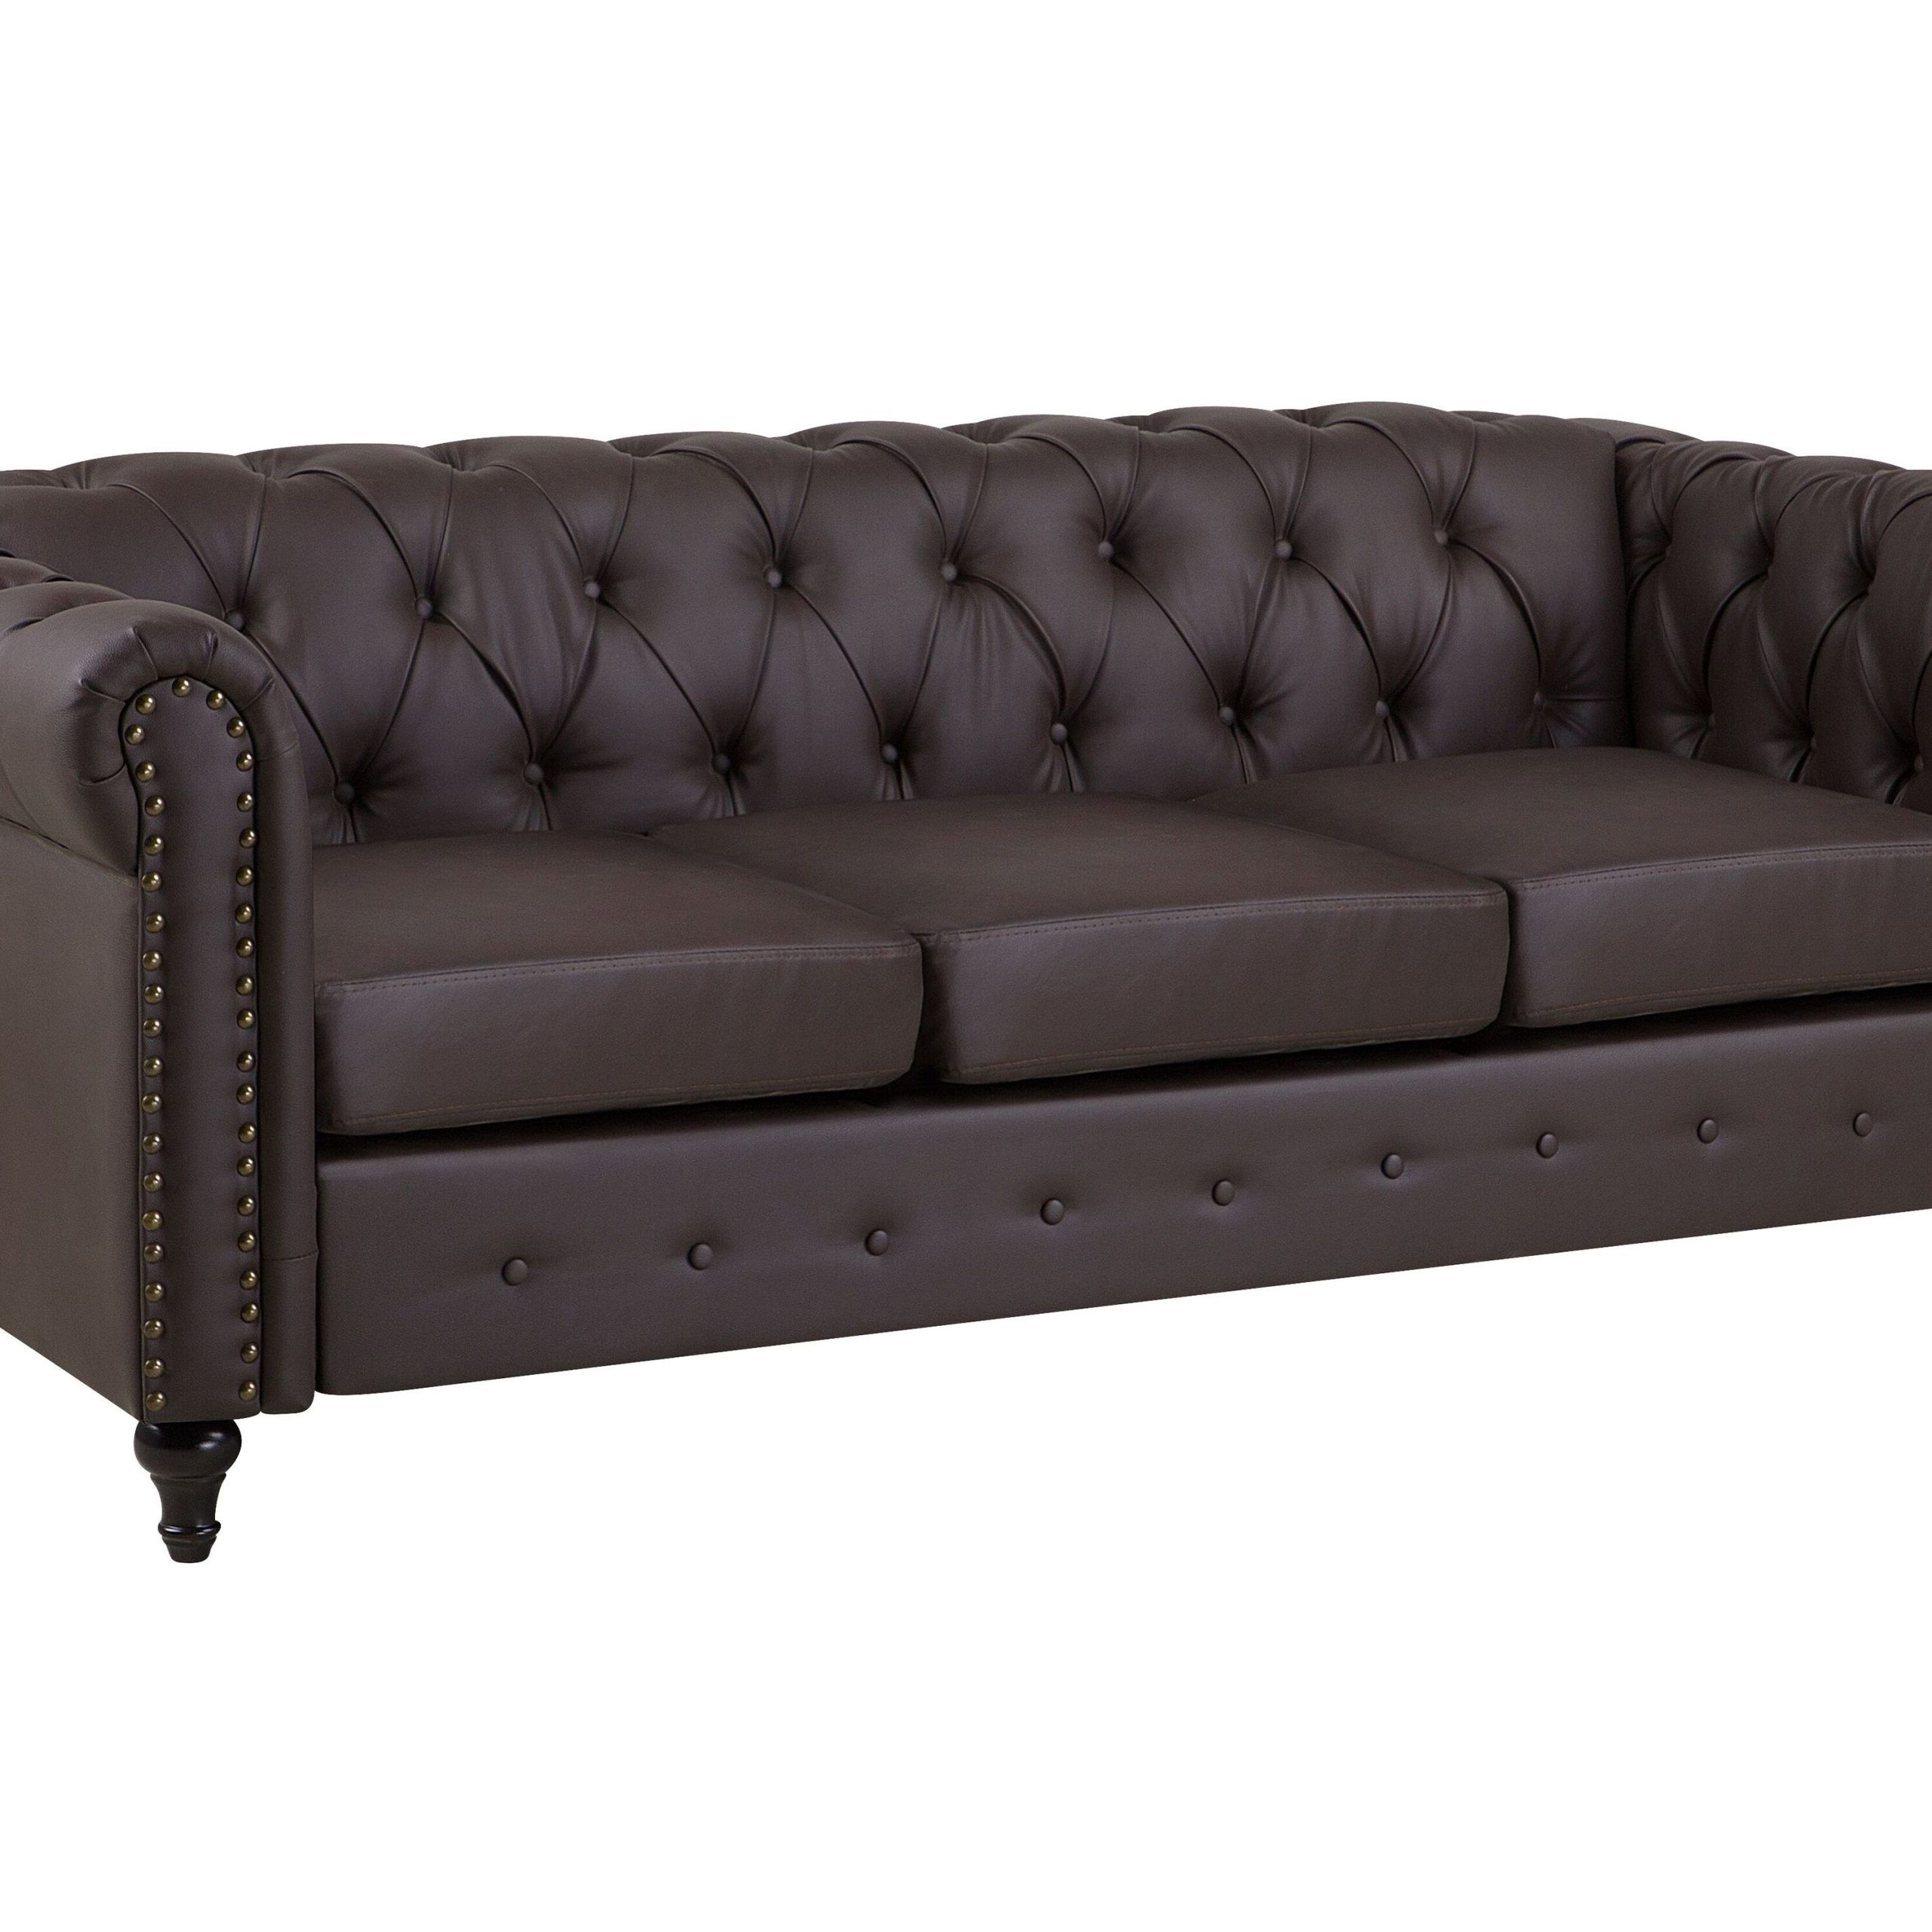 3 Seater Faux Leather Sofa Brown Chesterfield | Beliani.co.uk Intended For Traditional 3 Seater Faux Leather Sofas (Gallery 10 of 20)